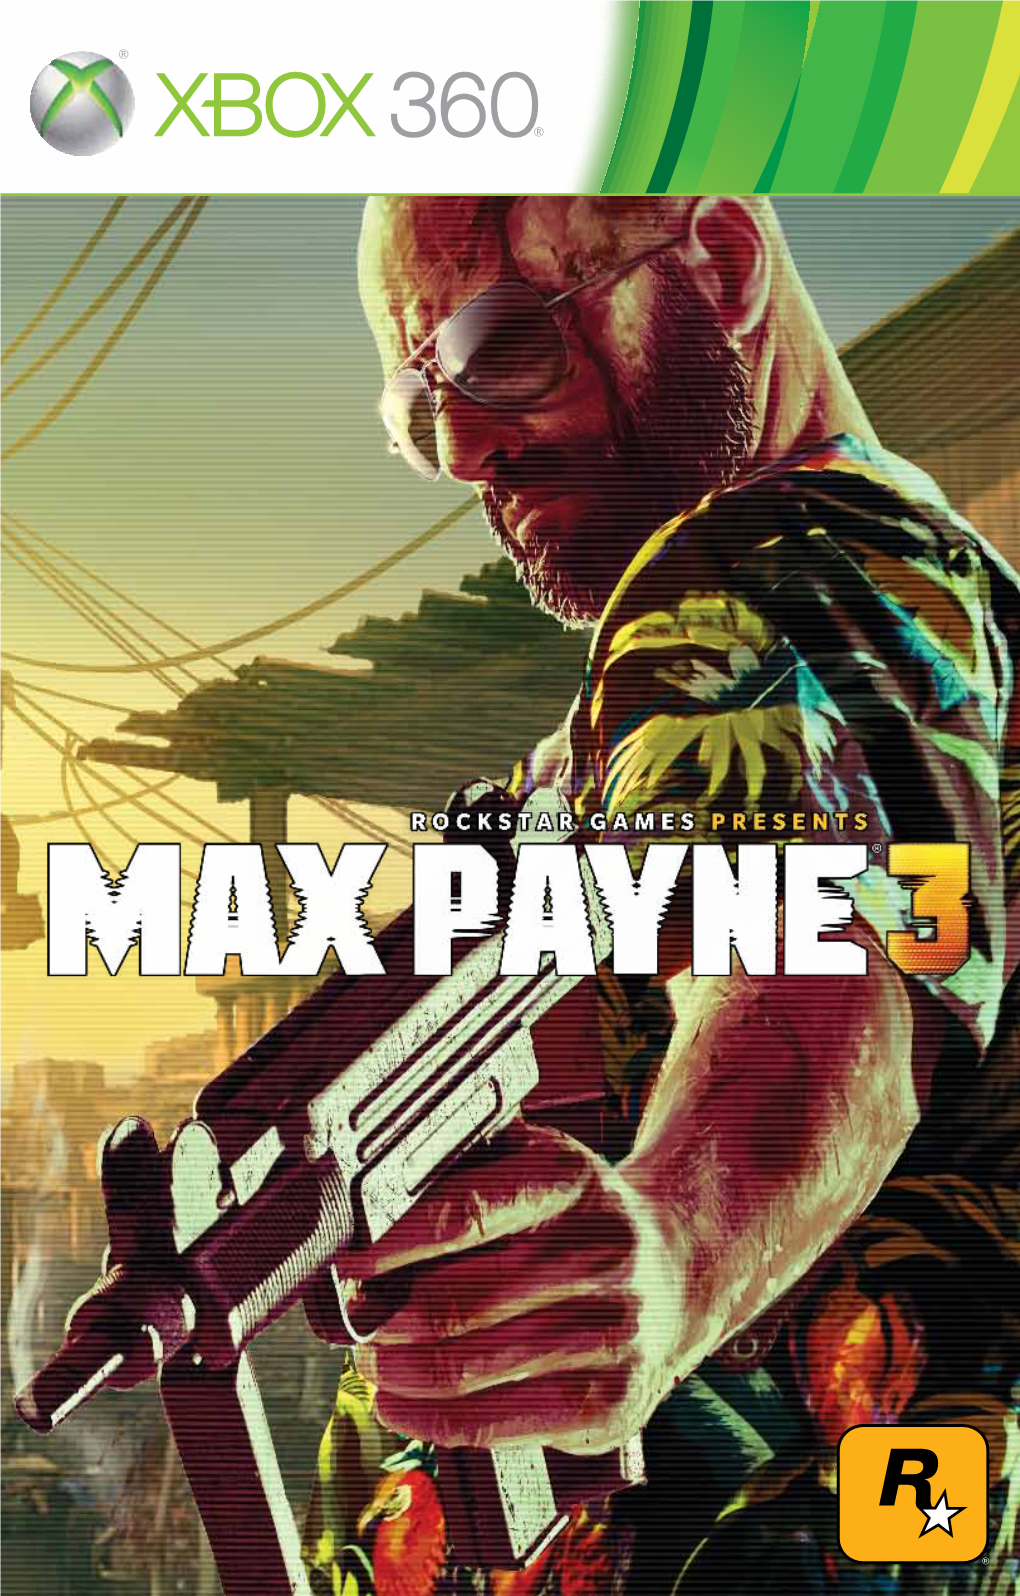 Max Payne 3 Has Advanced Control Speed of the Bullet Cam by Holding the Settings for Targeting